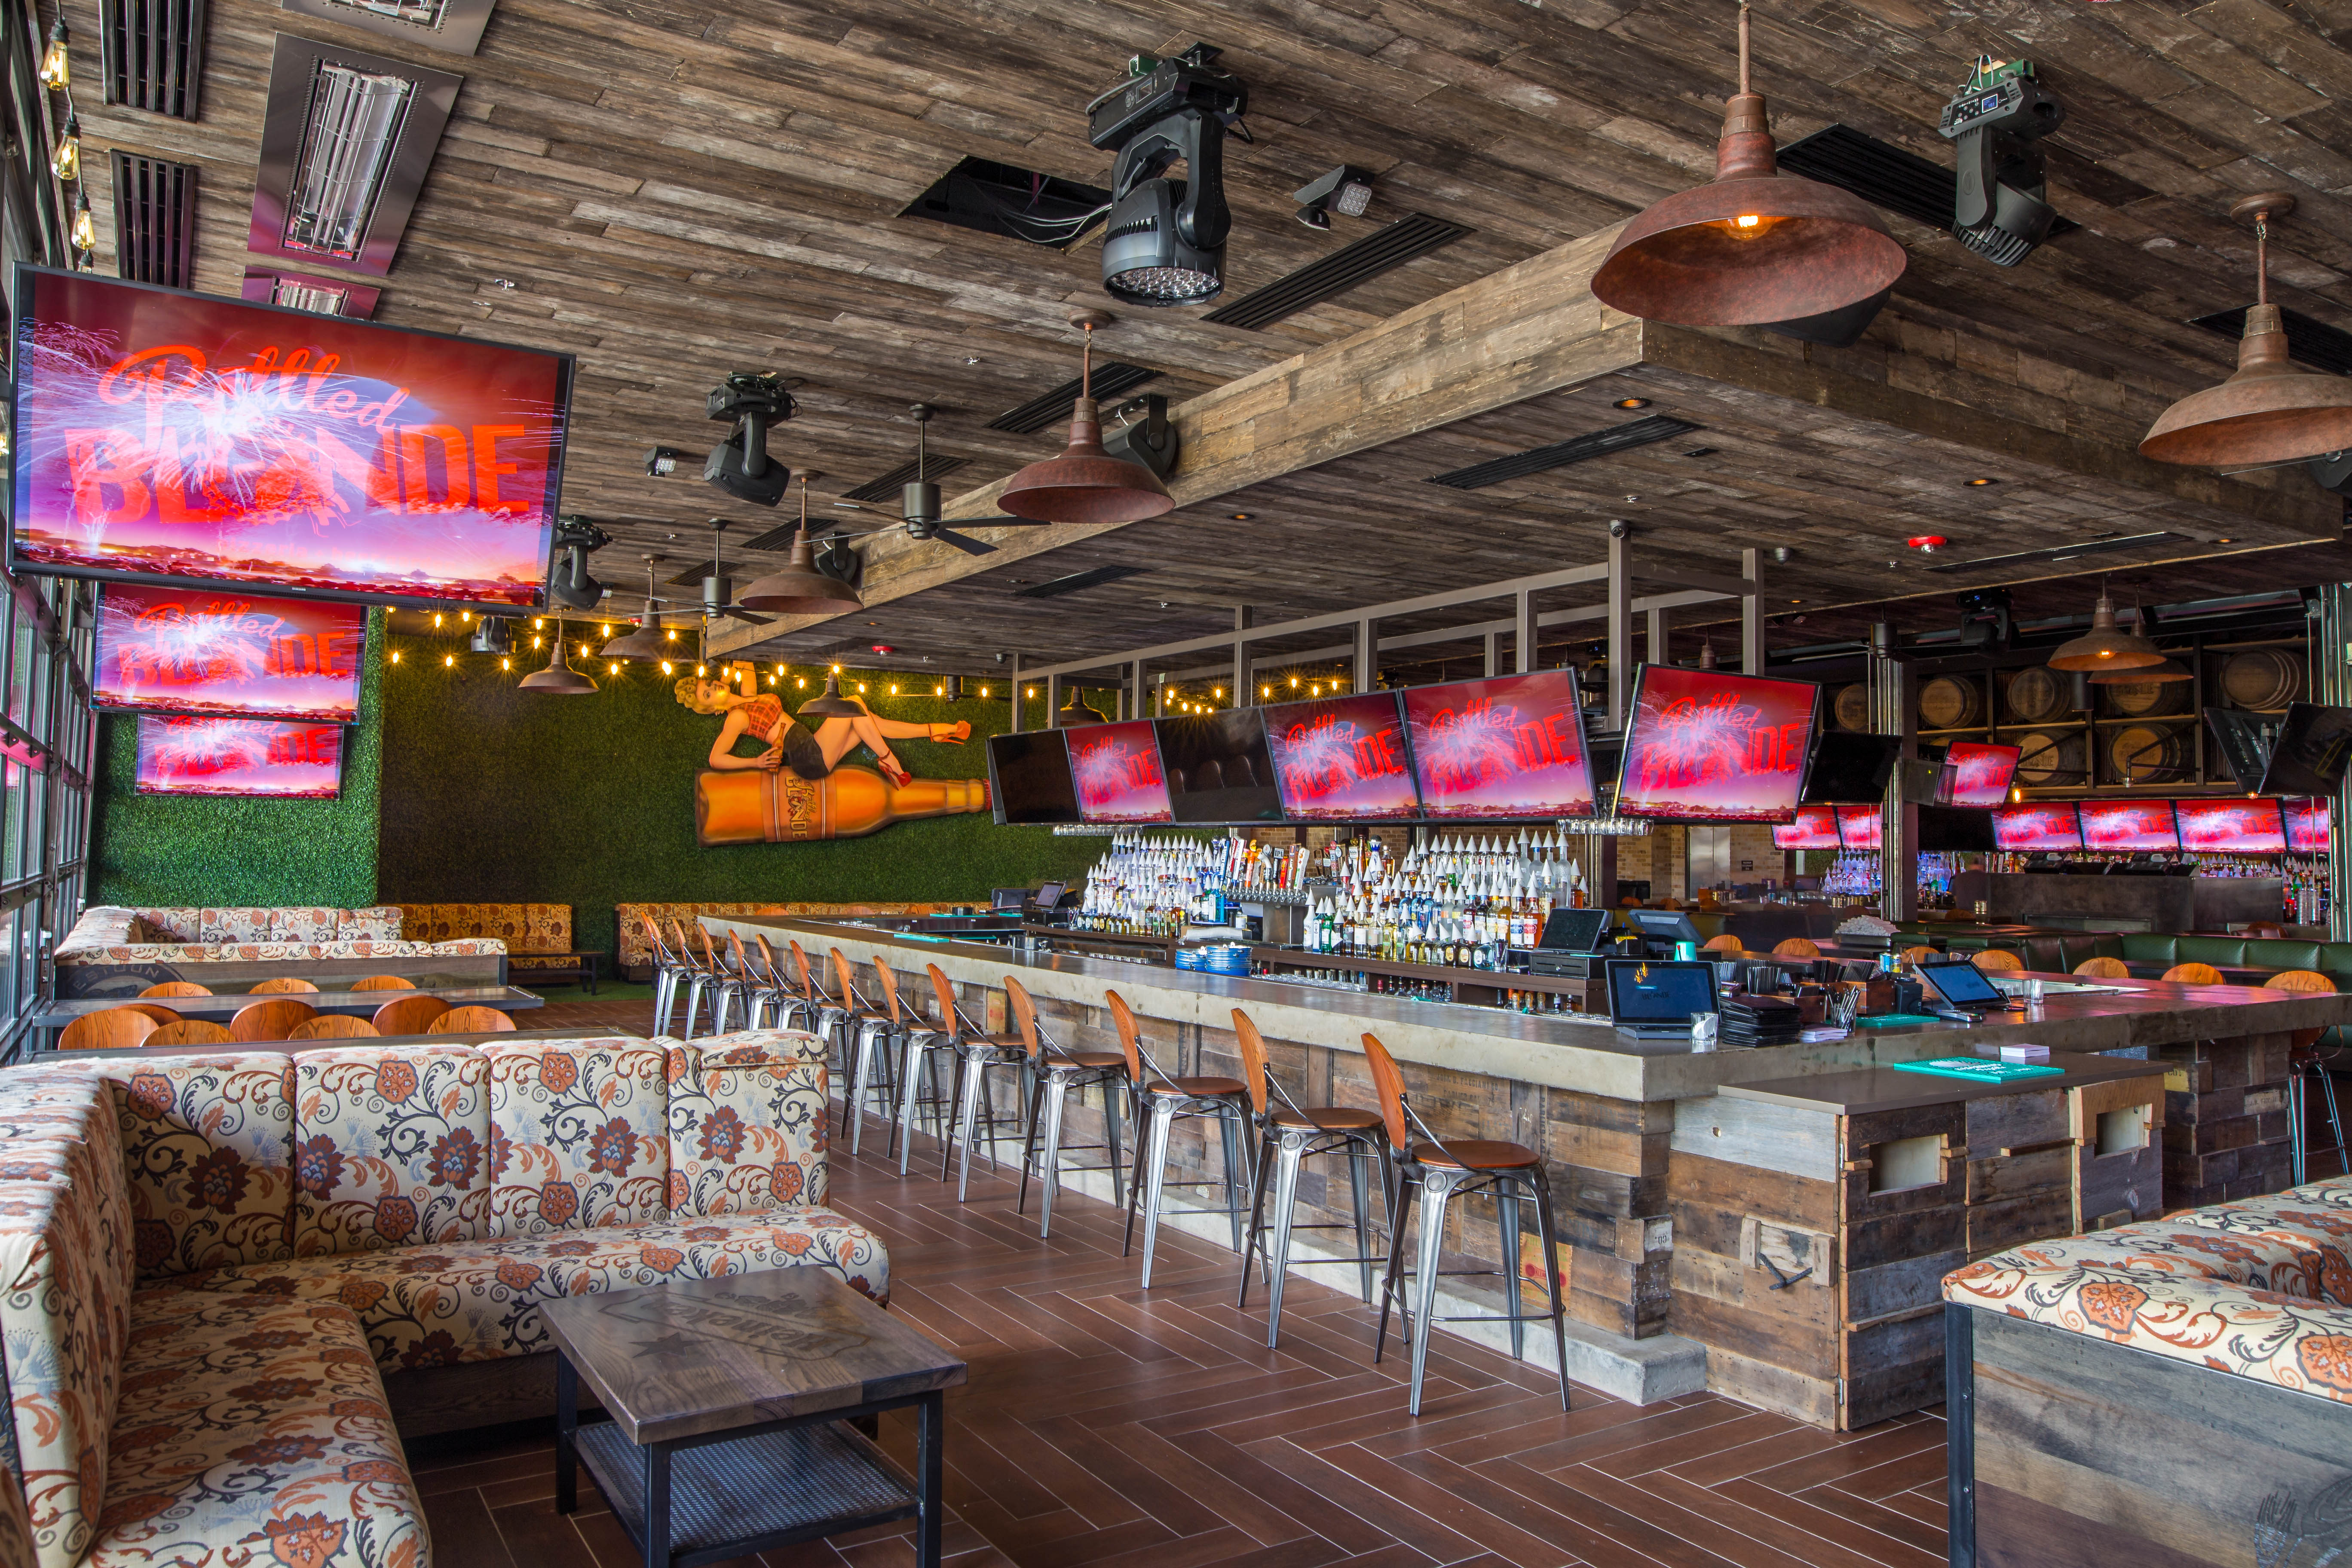 The interior of Bottled Blonde in Houston. Floral patterned banquettes sit on a herringbone pattern wood floor with a rustic wood bar and TV screens in the background.